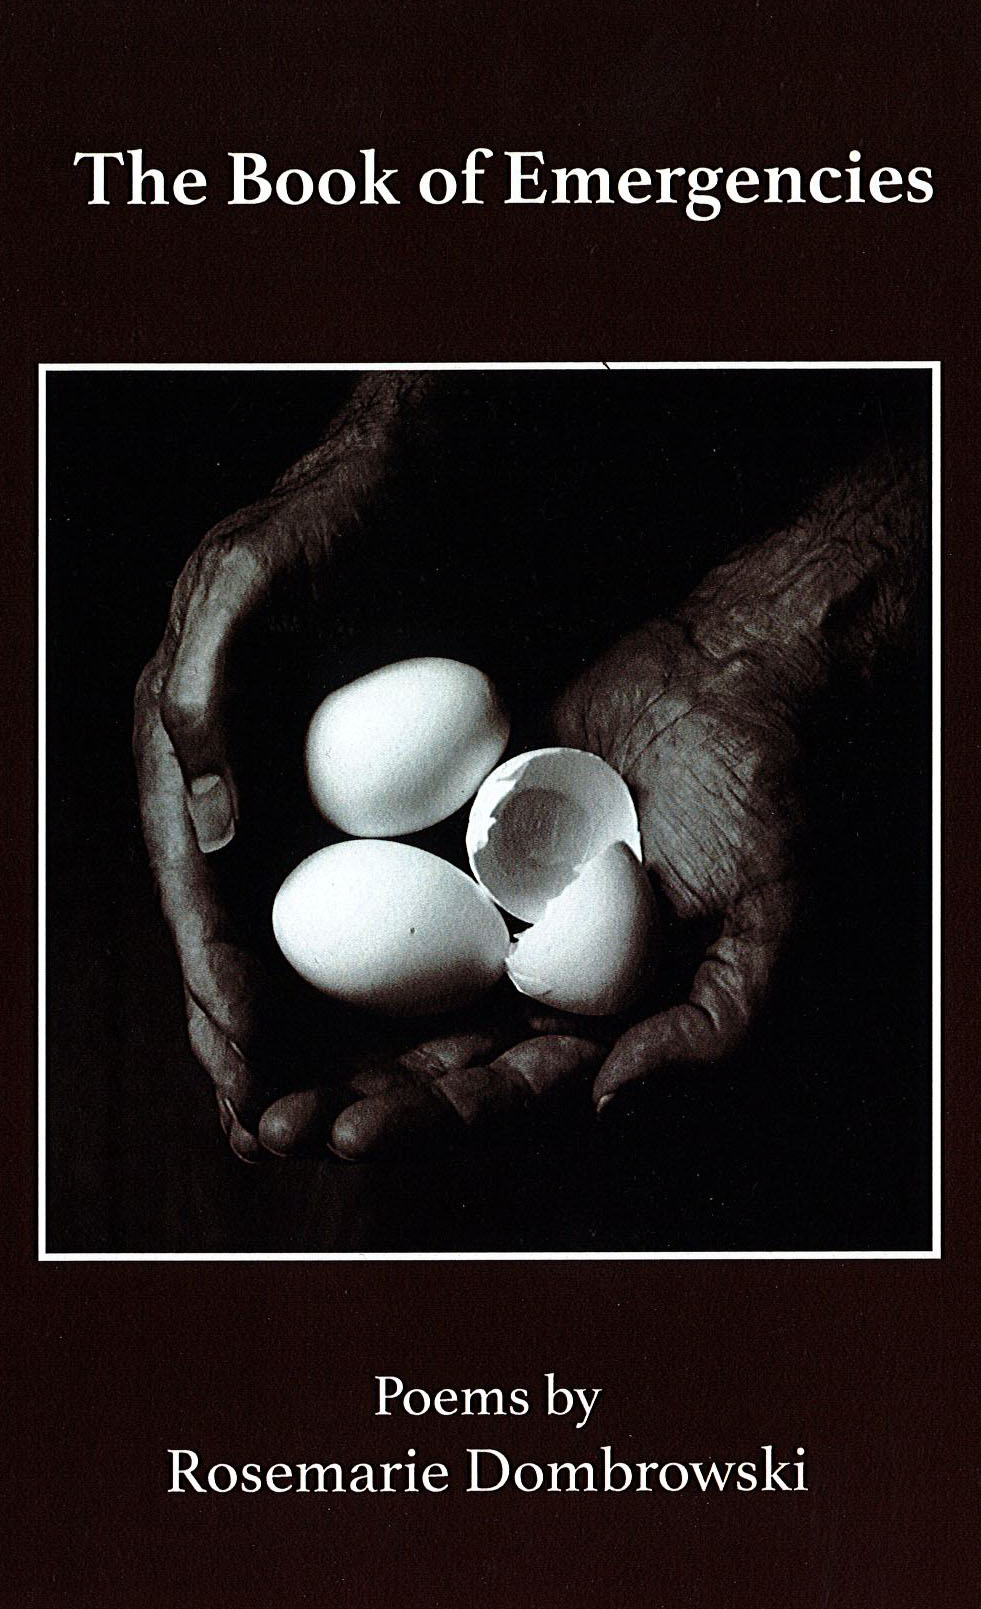 Cover of The Book of emergencies: Hands holding egg shells, one broken